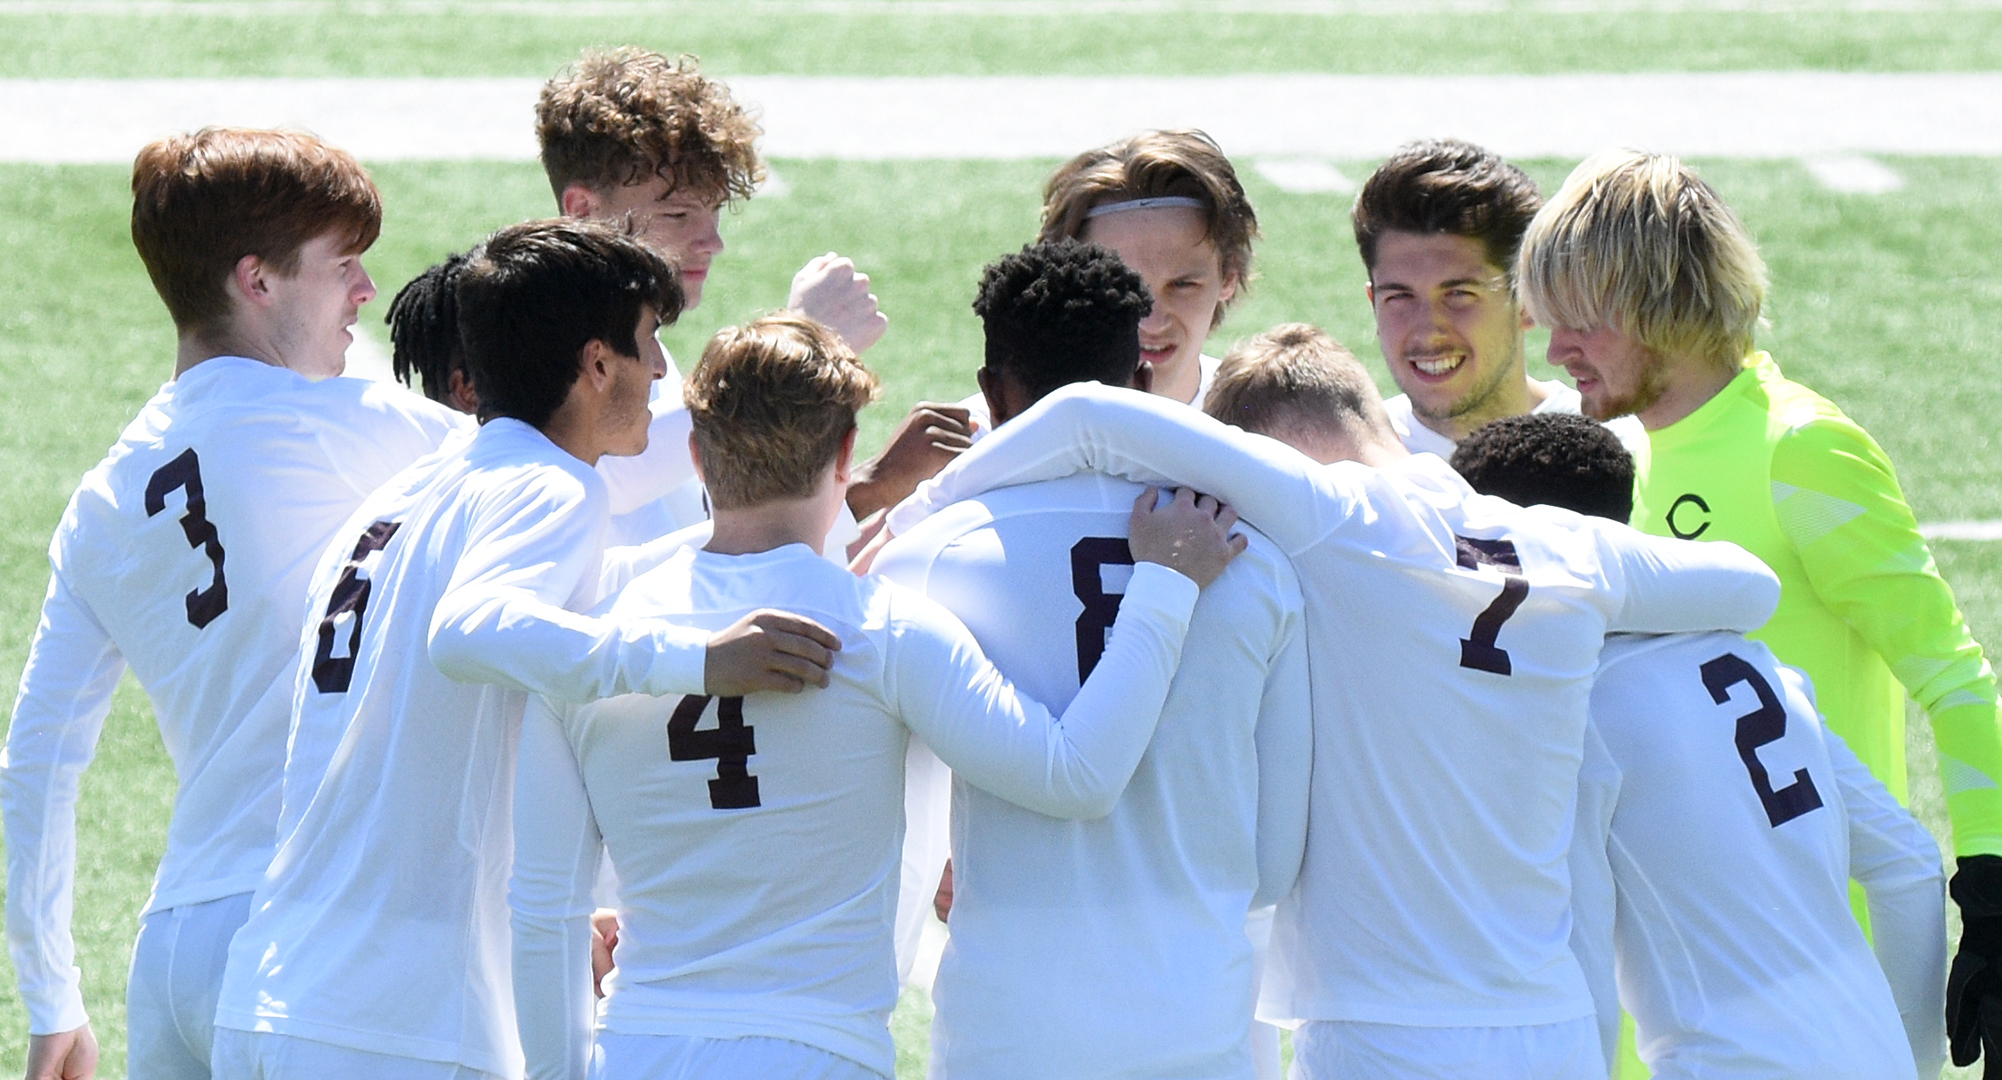 Concordia is averaging 2.8 goals per game this spring and has posted at least two goals in four of the five games they have played. They have won all four of those contests.